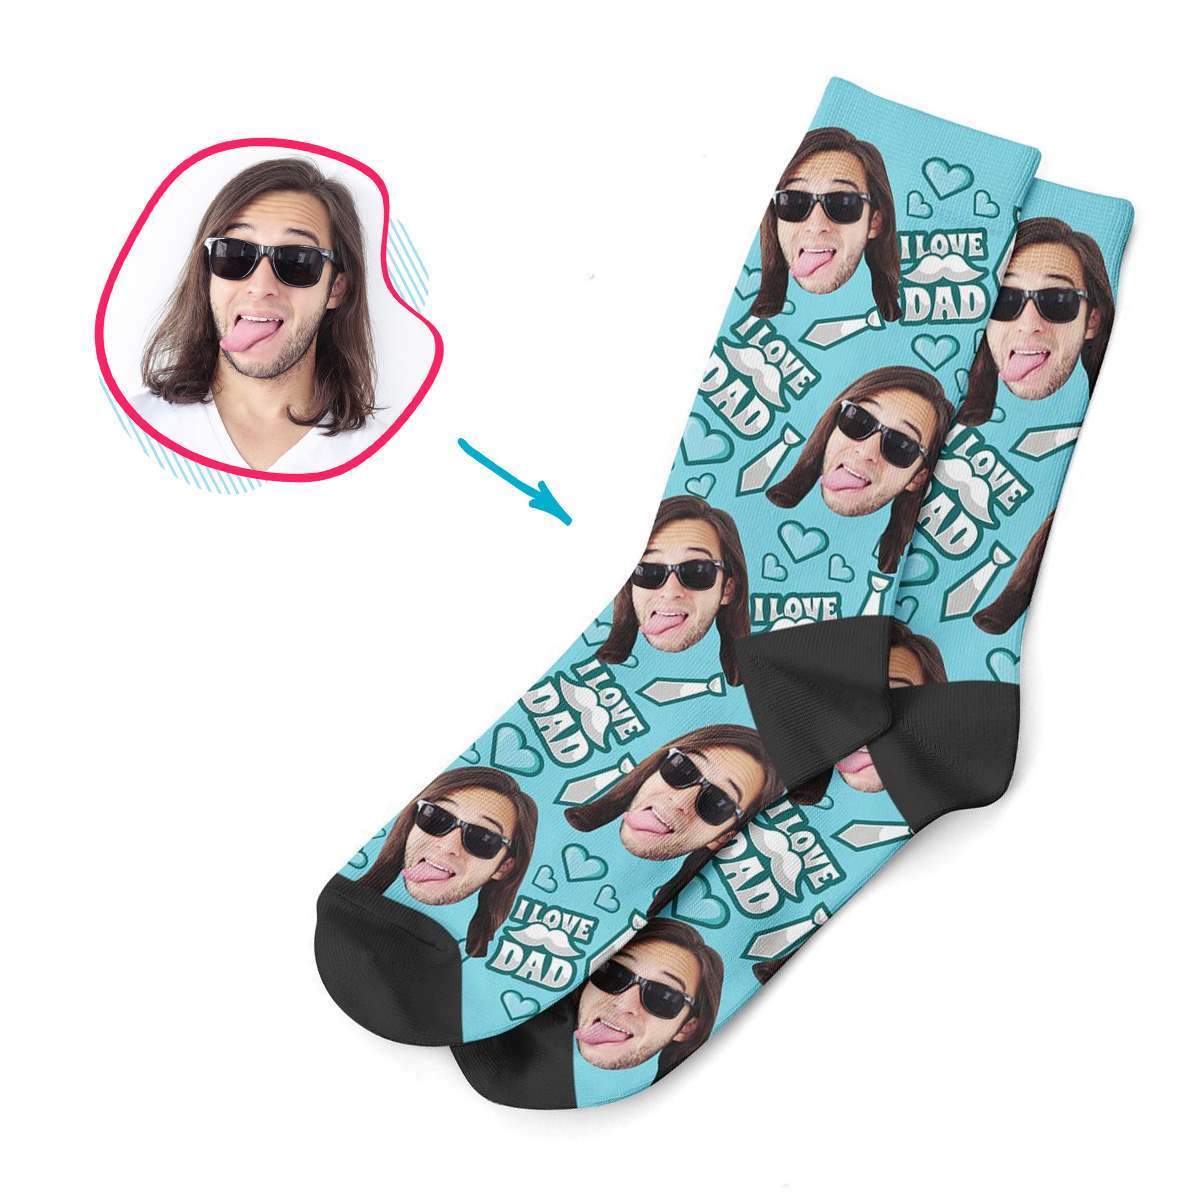 blue Love Dad socks personalized with photo of face printed on them